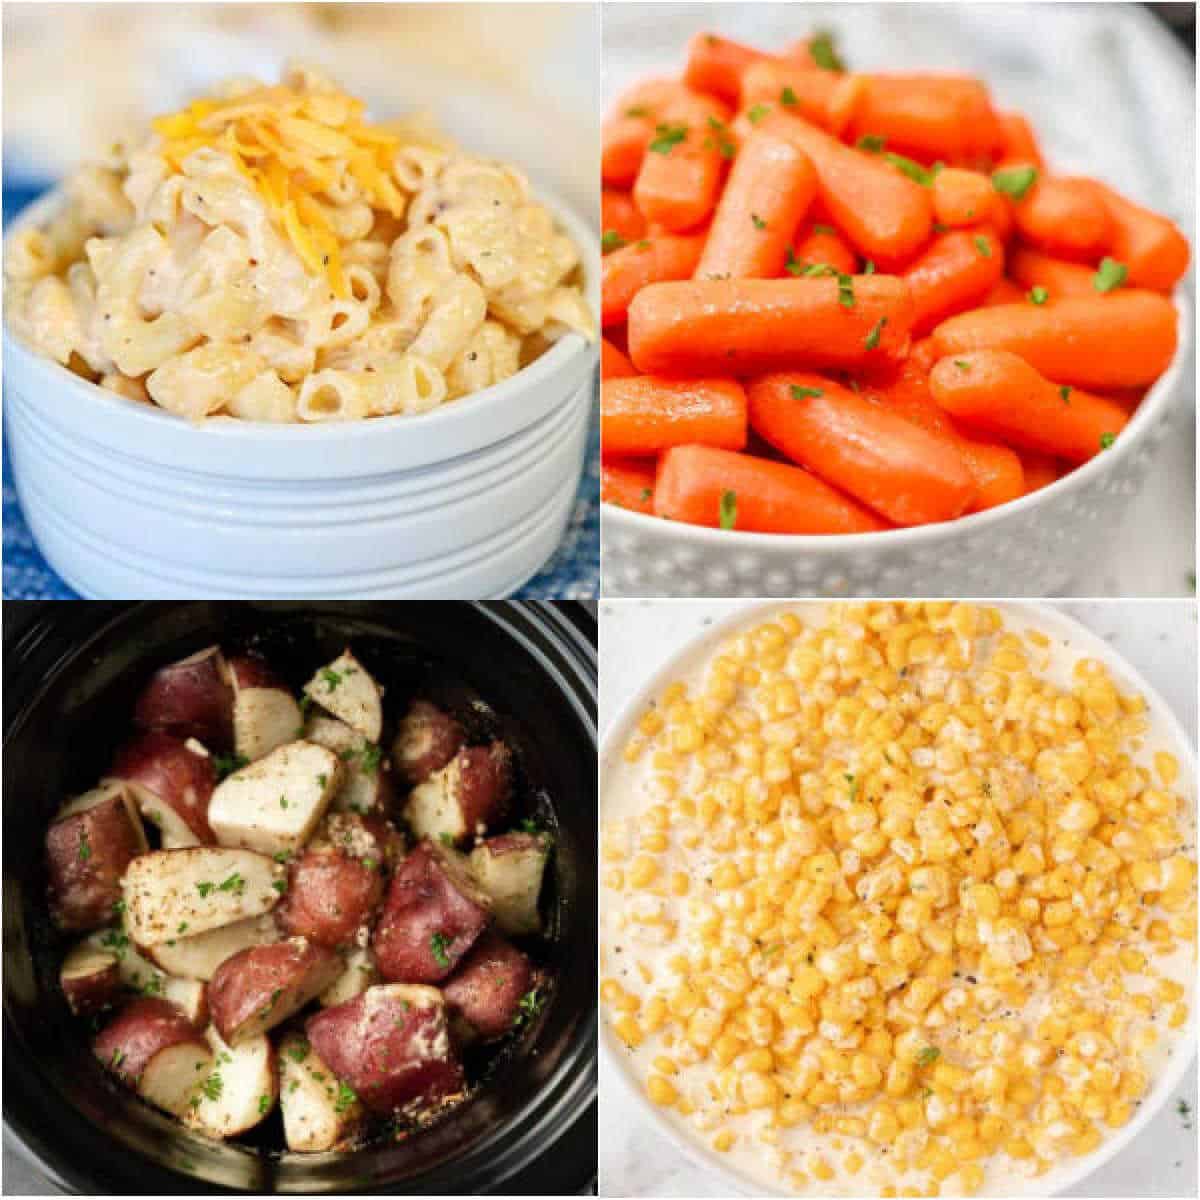 10 Side Dishes That CROCK! - Recipes That Crock!